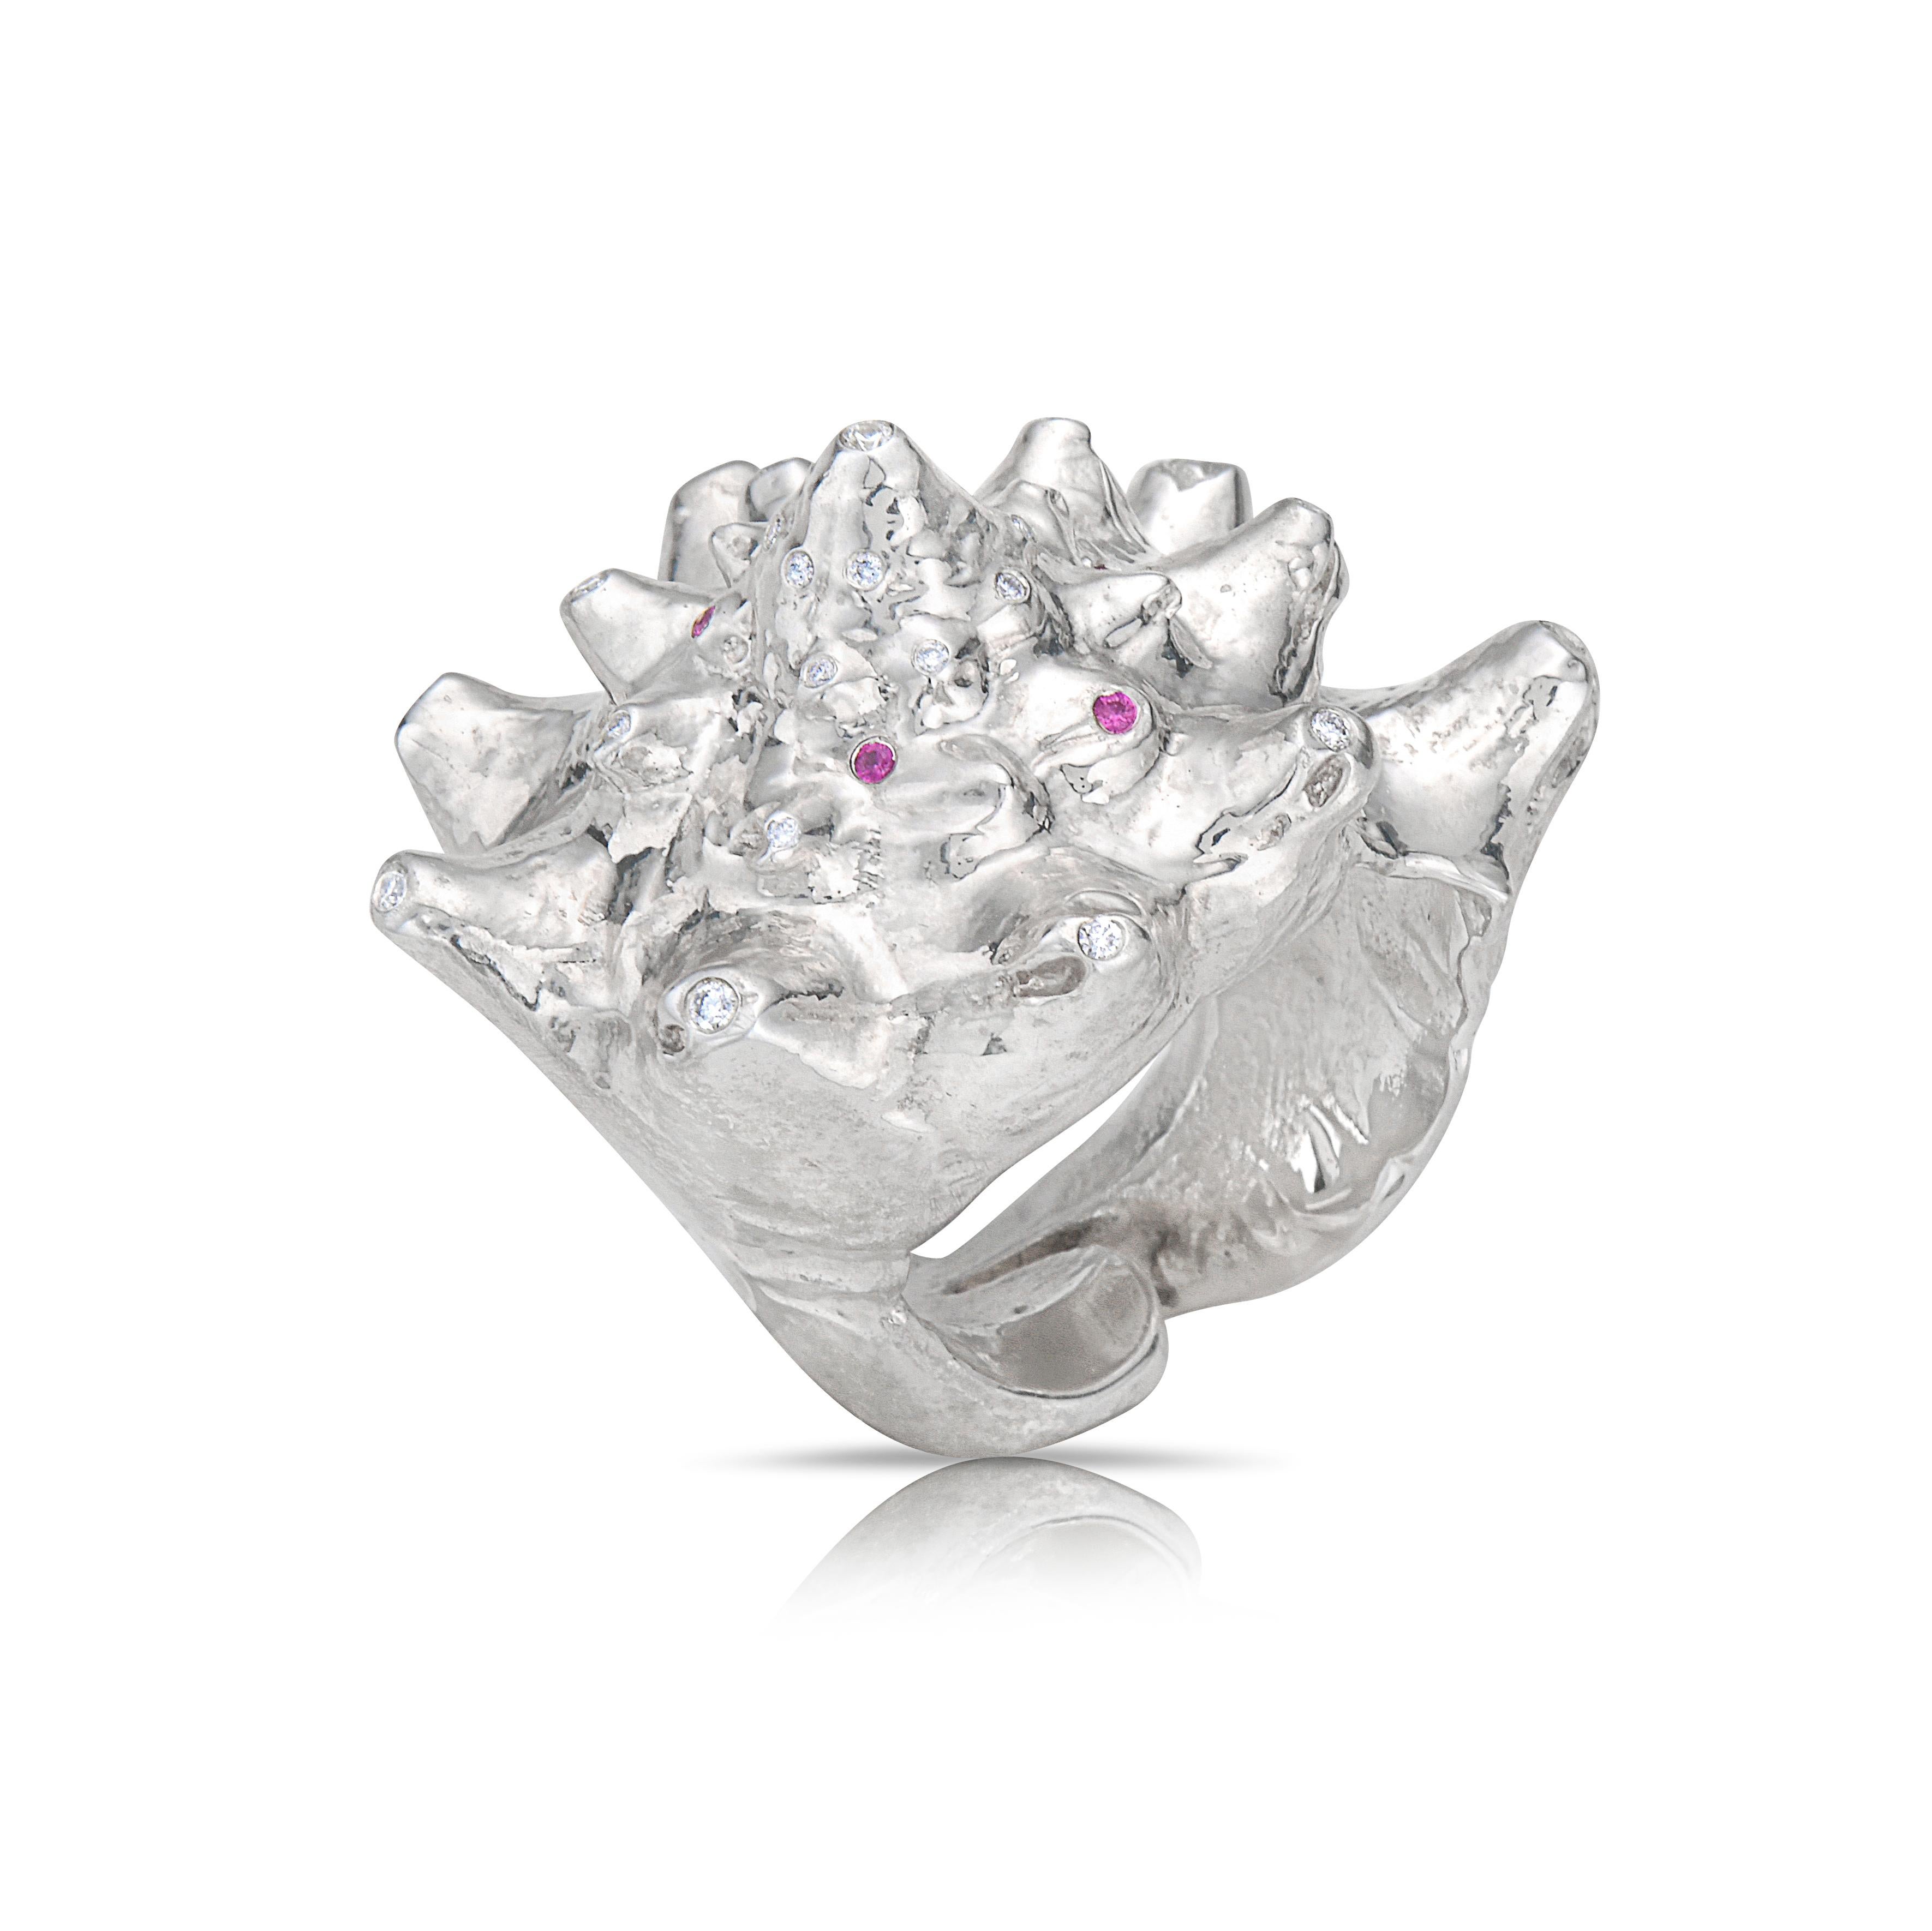 Sterling Silver Diamond Pink Sapphire Shell Ring. Cast from the organic shell straight from the ocean, this solid sterling silver nautical ring is a showstopping object of desire. Place it on your coffee table to showcase this gorgeous weighted book